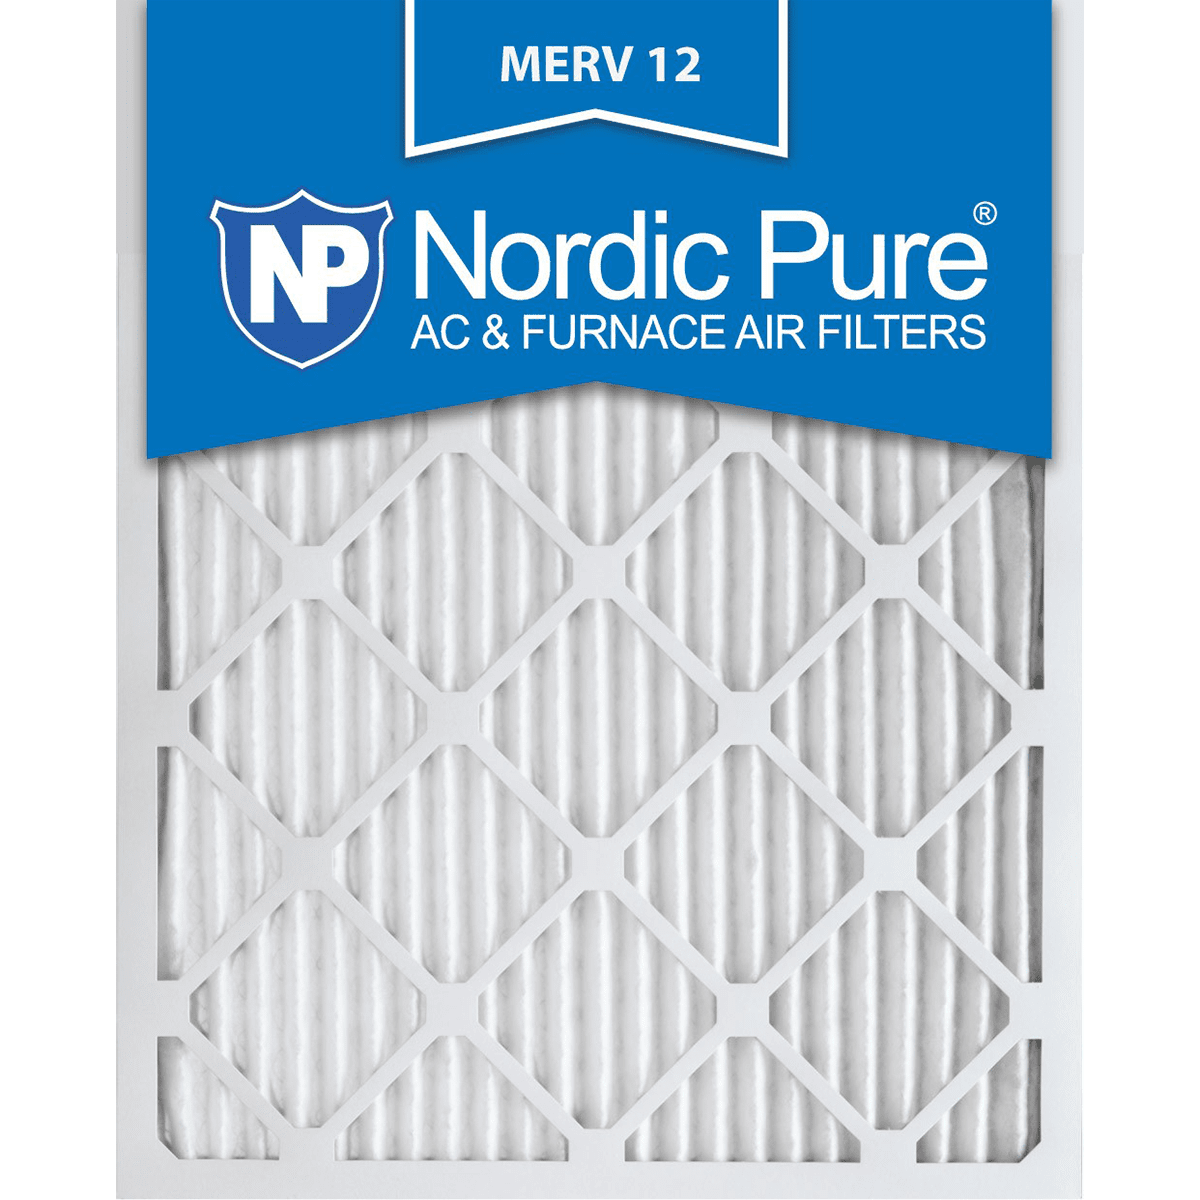 Nordic Pure MERV 12 Pleated Furnace Filter 20x25x1 6-Pack (20x25x1M12-6)